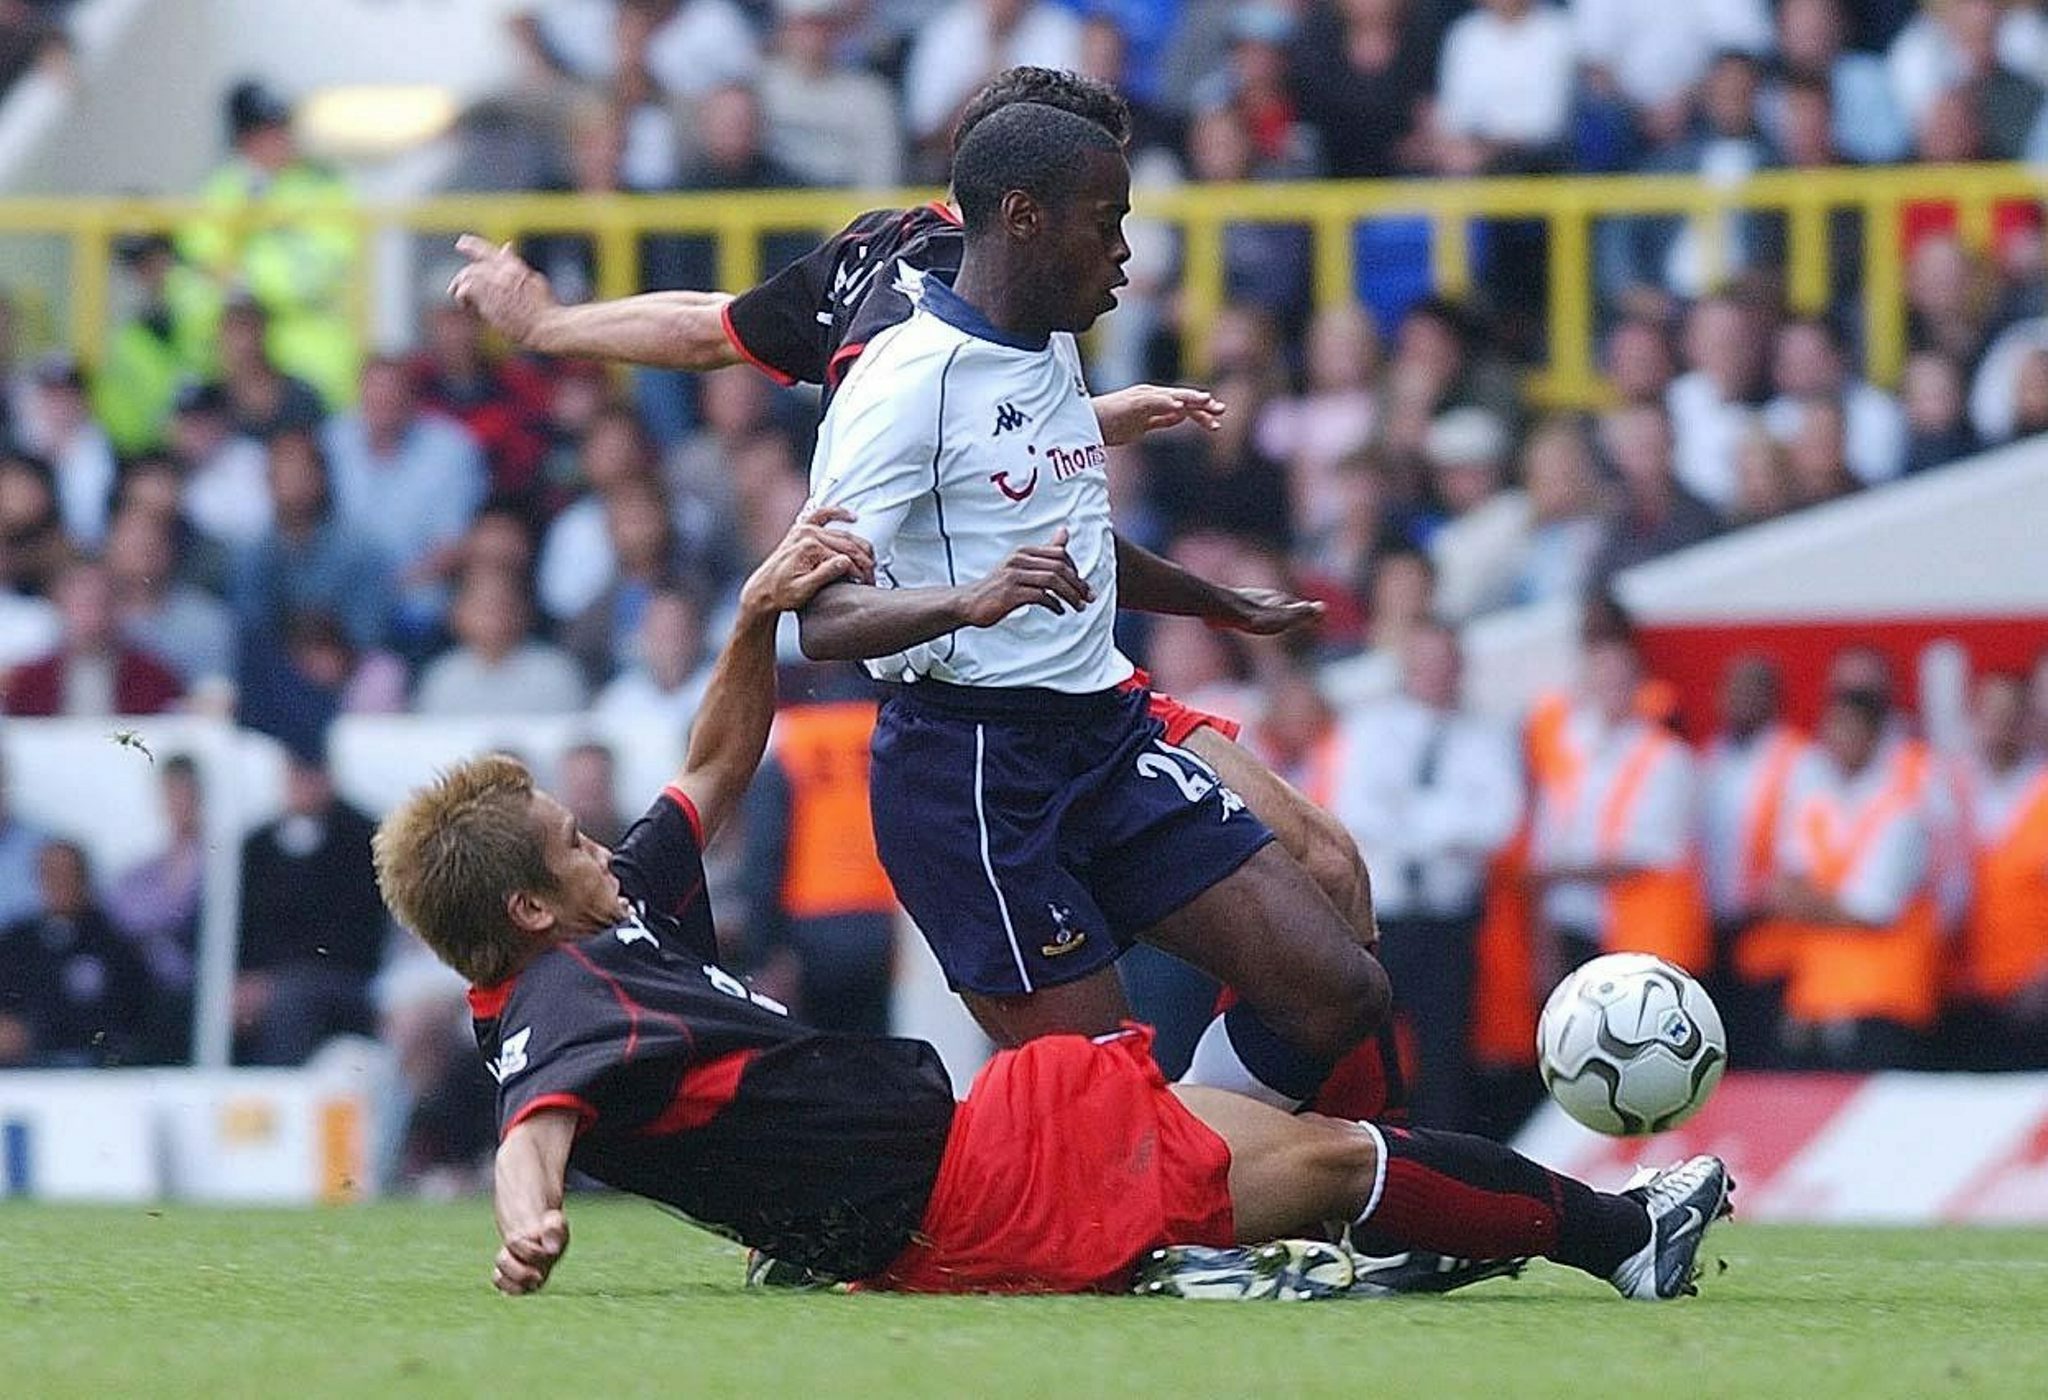 Rohan Ricketts in action for Tottenham Hotspur in 2003. Ricketts made 48 appearances for Spurs from 2002 to 2005. Photo: EPA